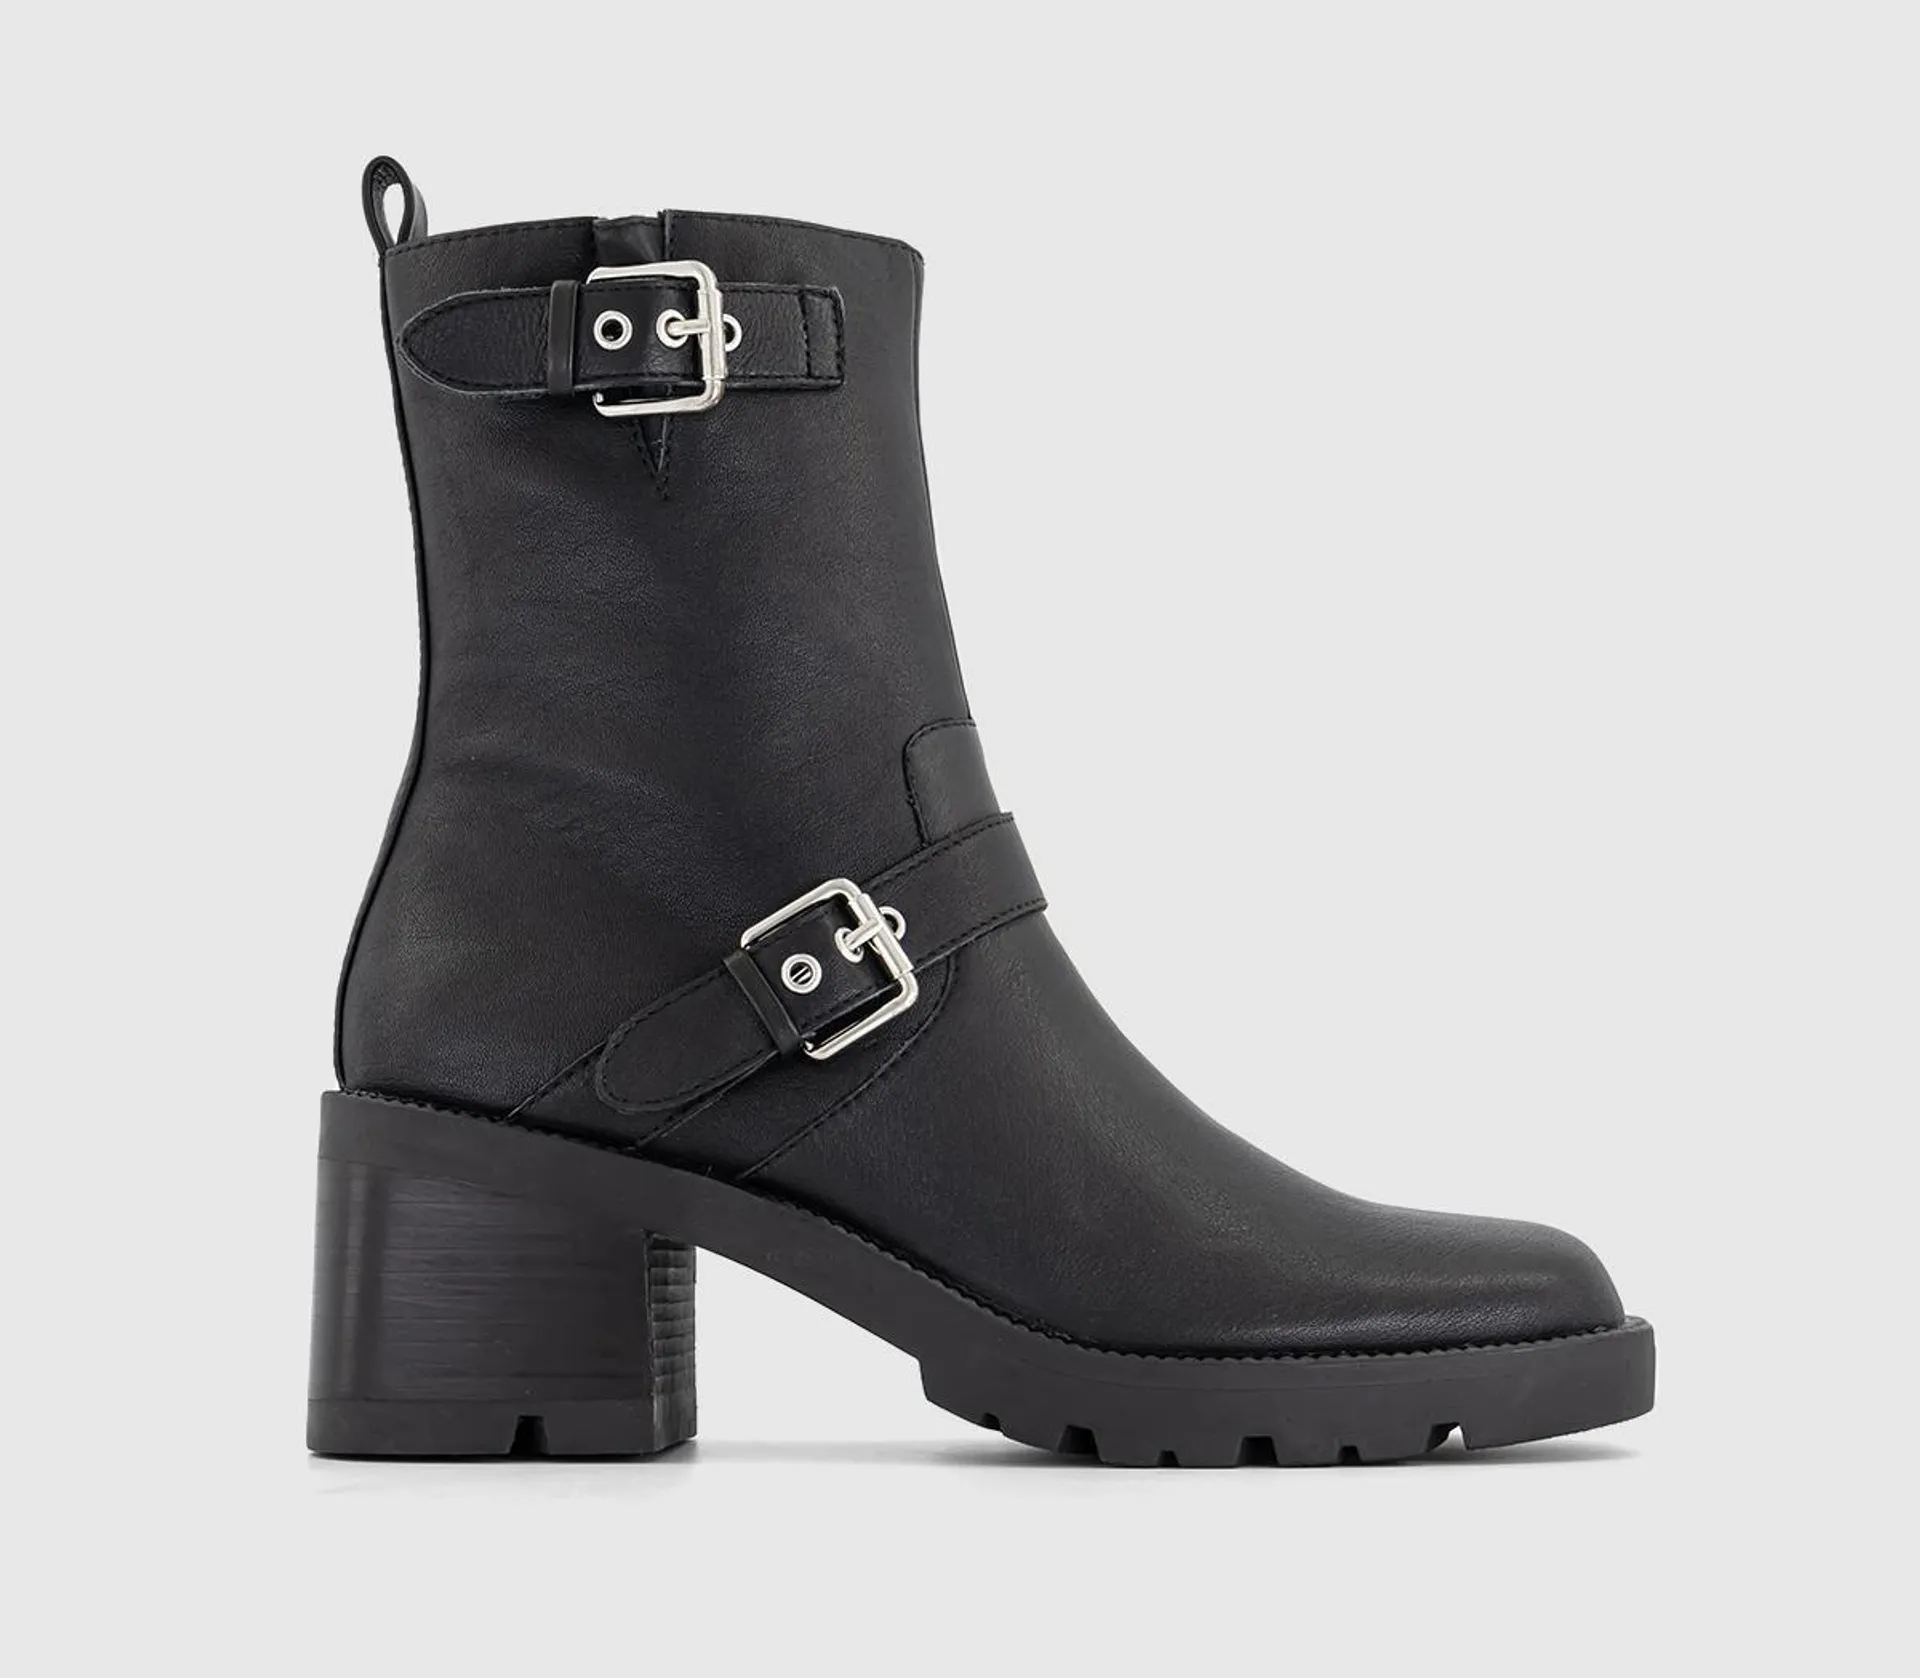 Affinity Cleated Sole Buckle Platform Boots